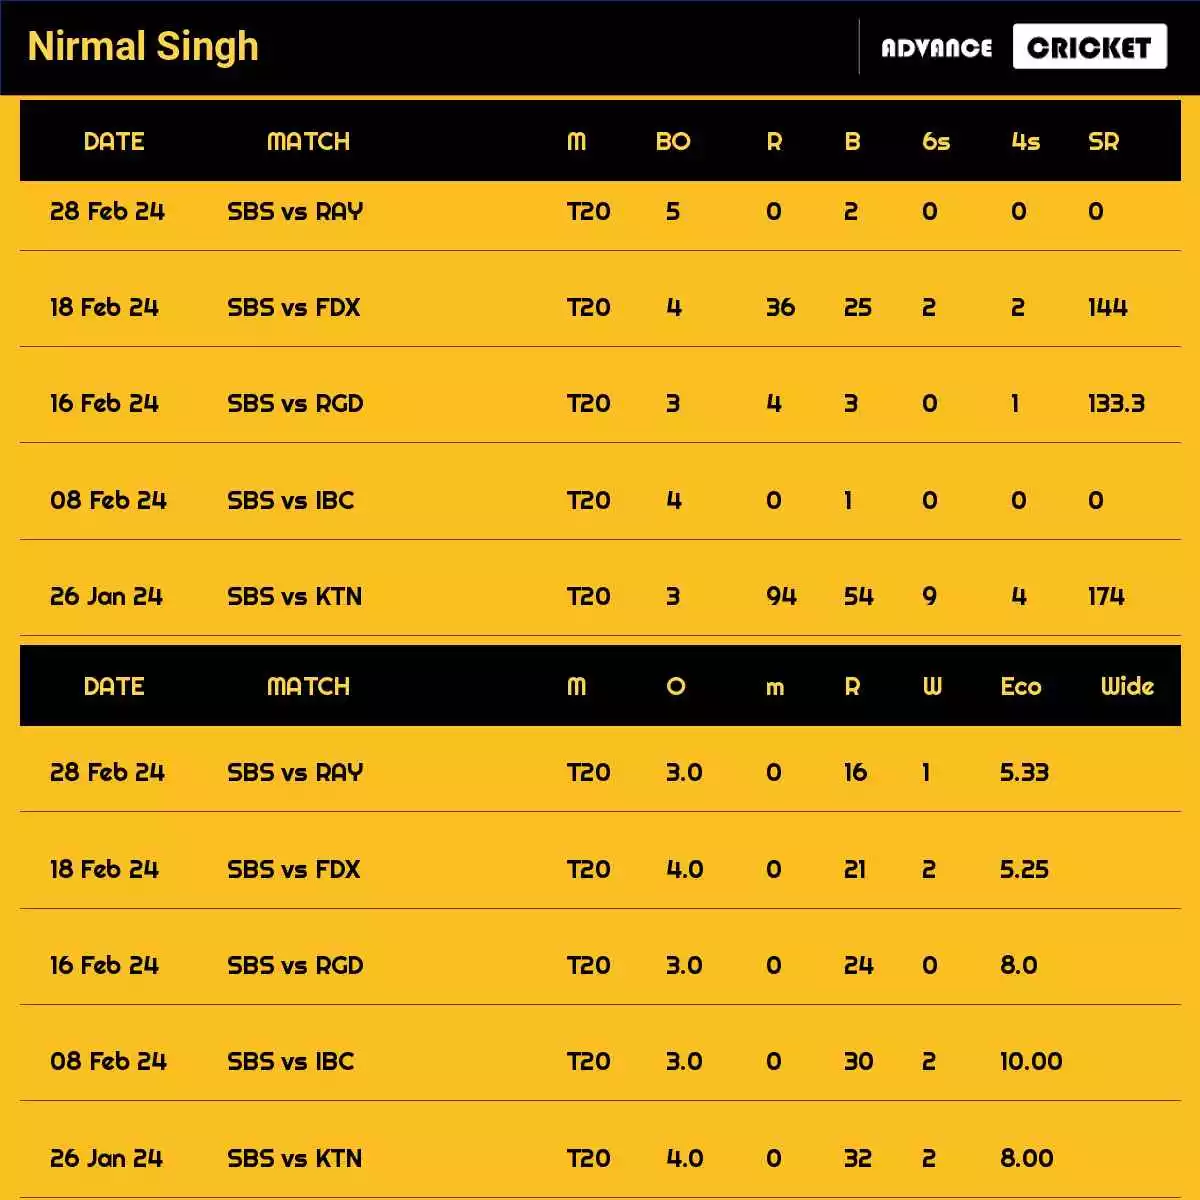 Nirmal Singh Recent Matches Details Date Wise